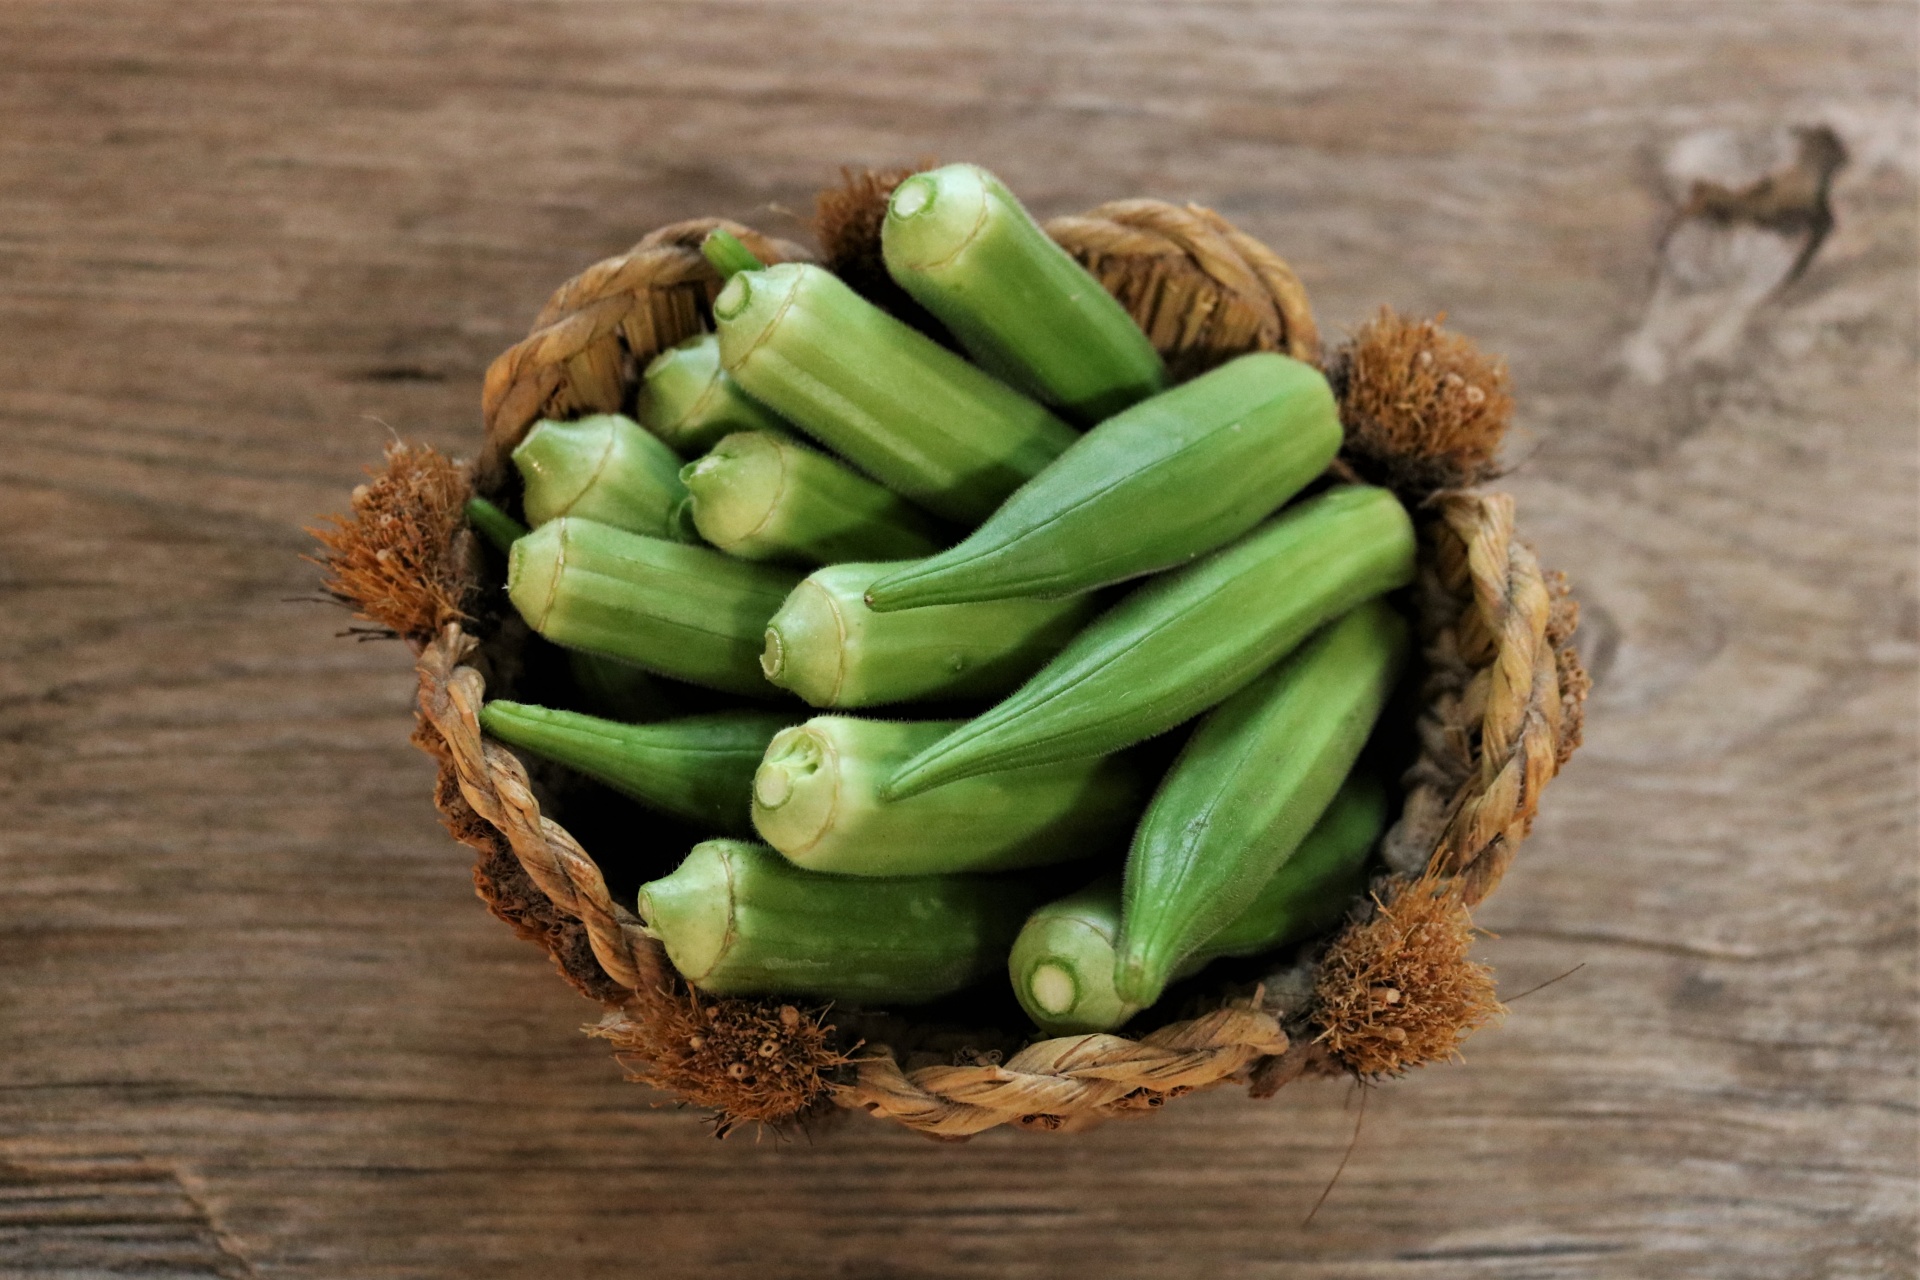 Top view of freshly picked okra in a straw basket on a wood table.